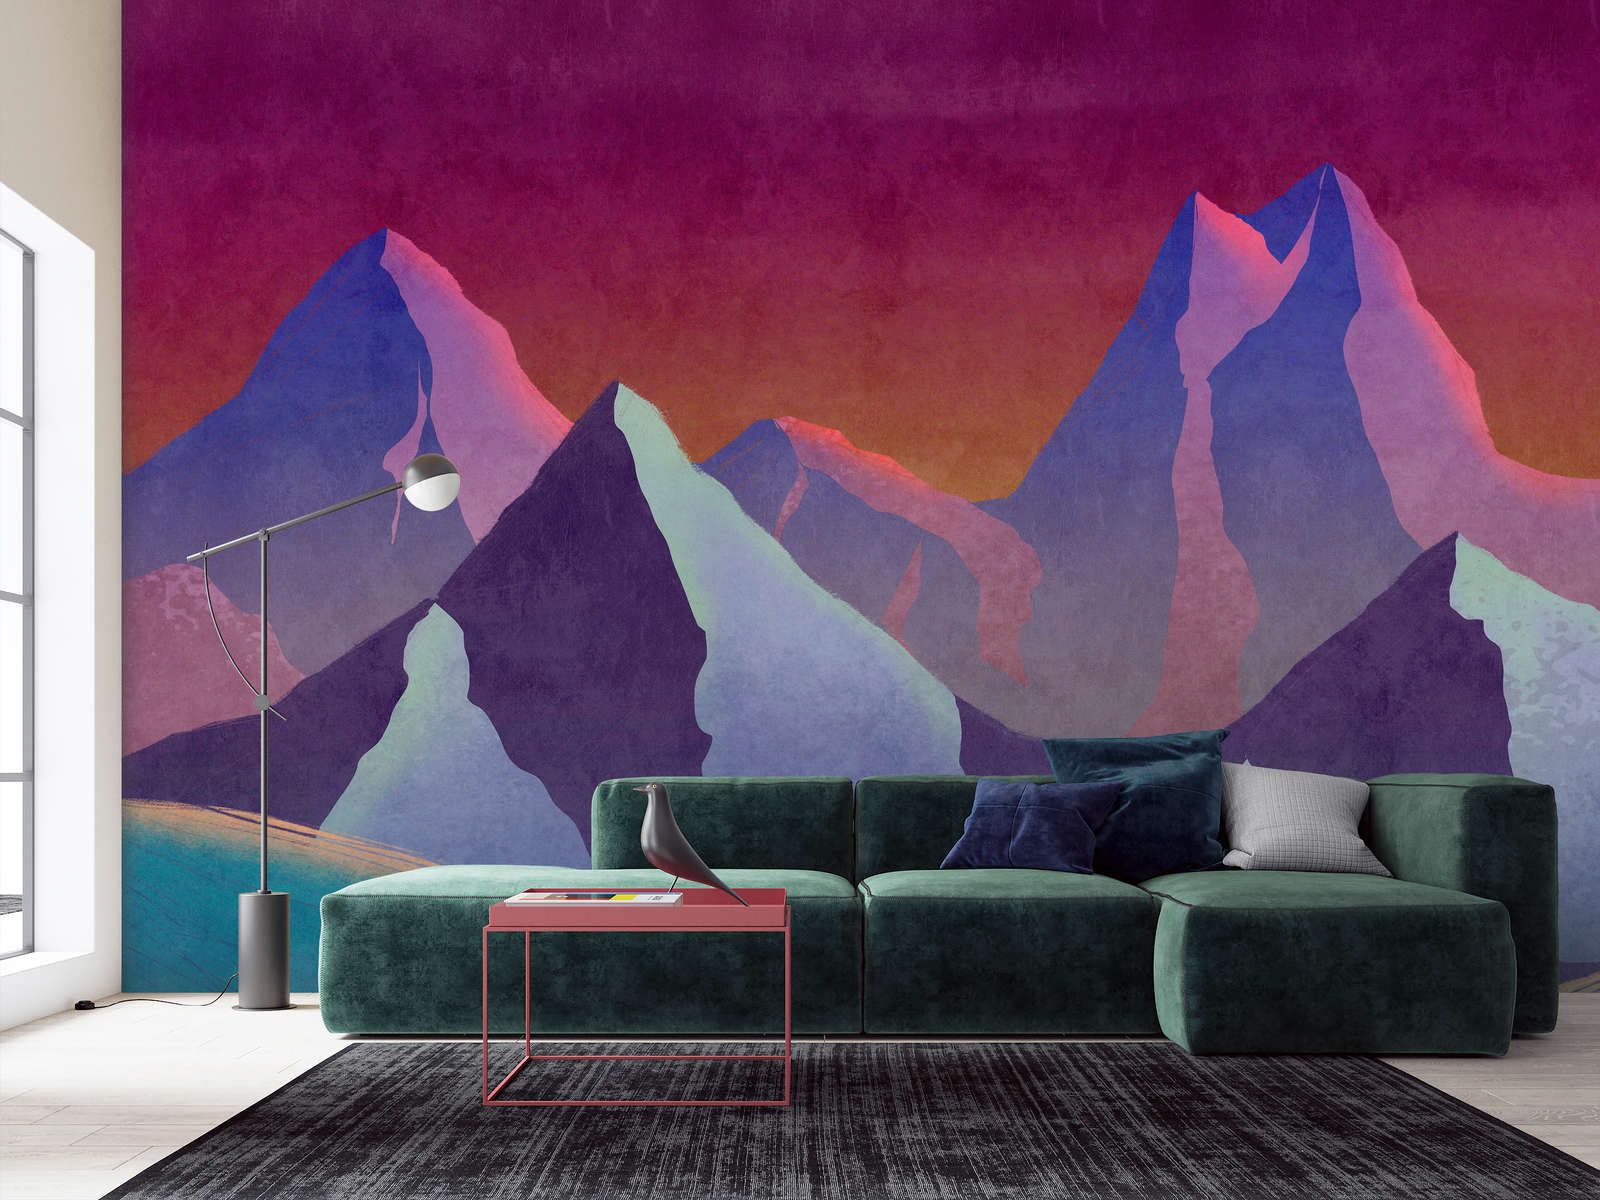             Photo wallpaper »altitude 1« - Abstract mountains in neon colours with vintage plaster texture - Matt, smooth non-woven fabric
        